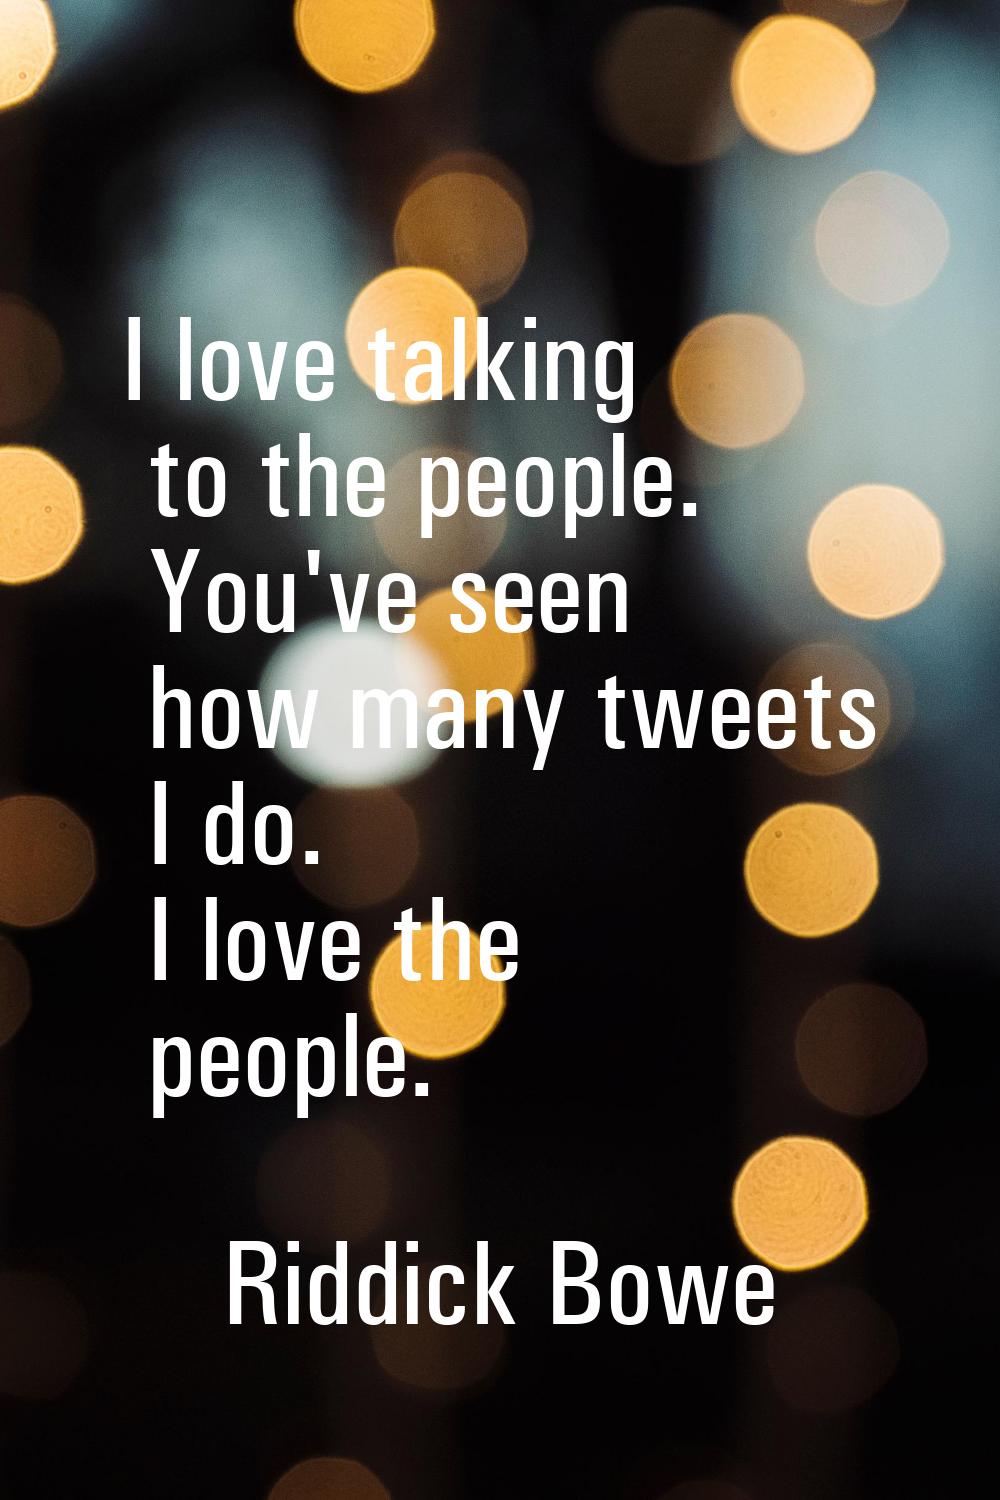 I love talking to the people. You've seen how many tweets I do. I love the people.